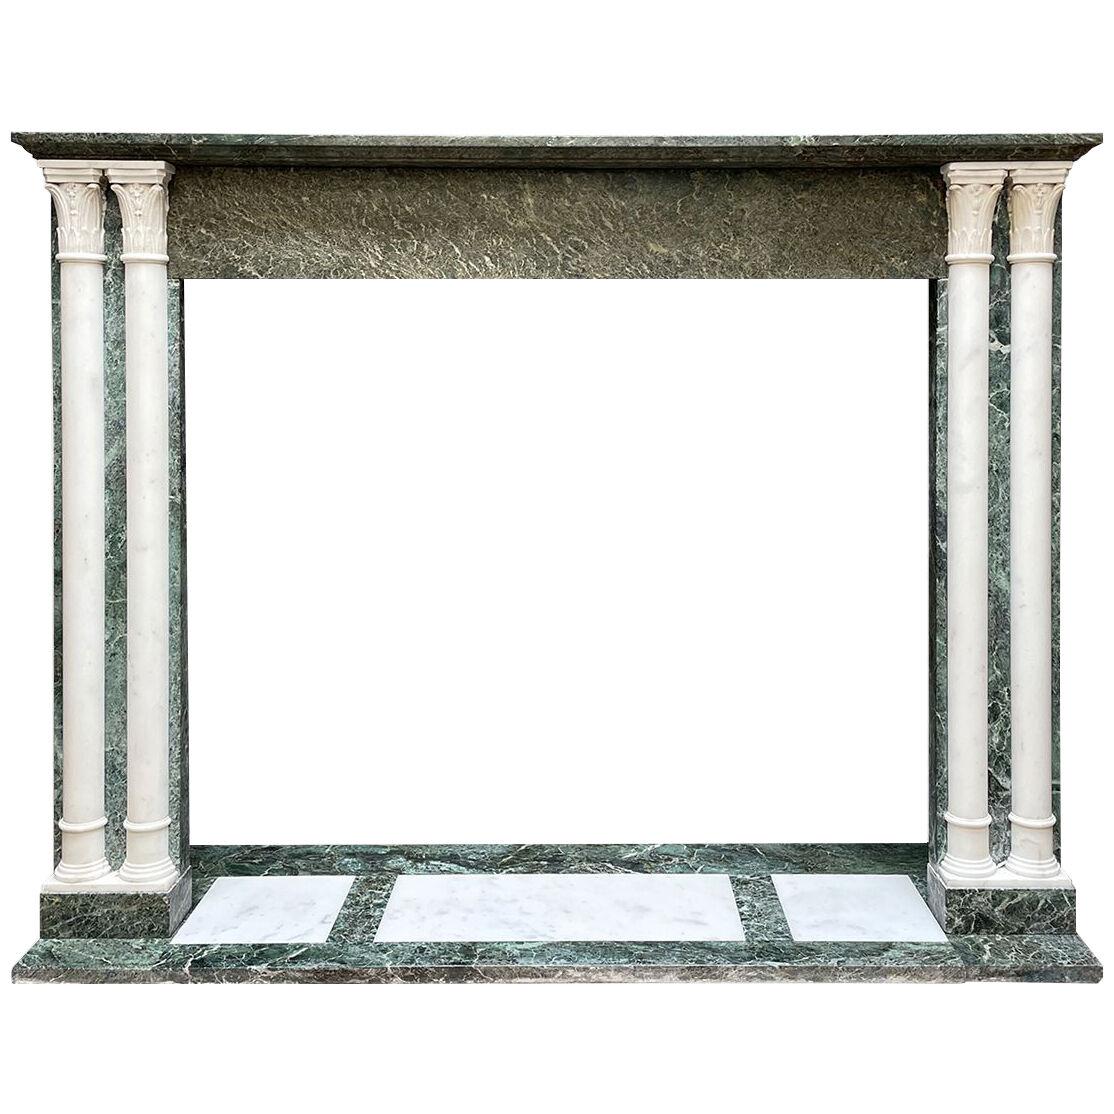 Antique French Fireplace Mantel in Verdi Antico and Statuary Marble